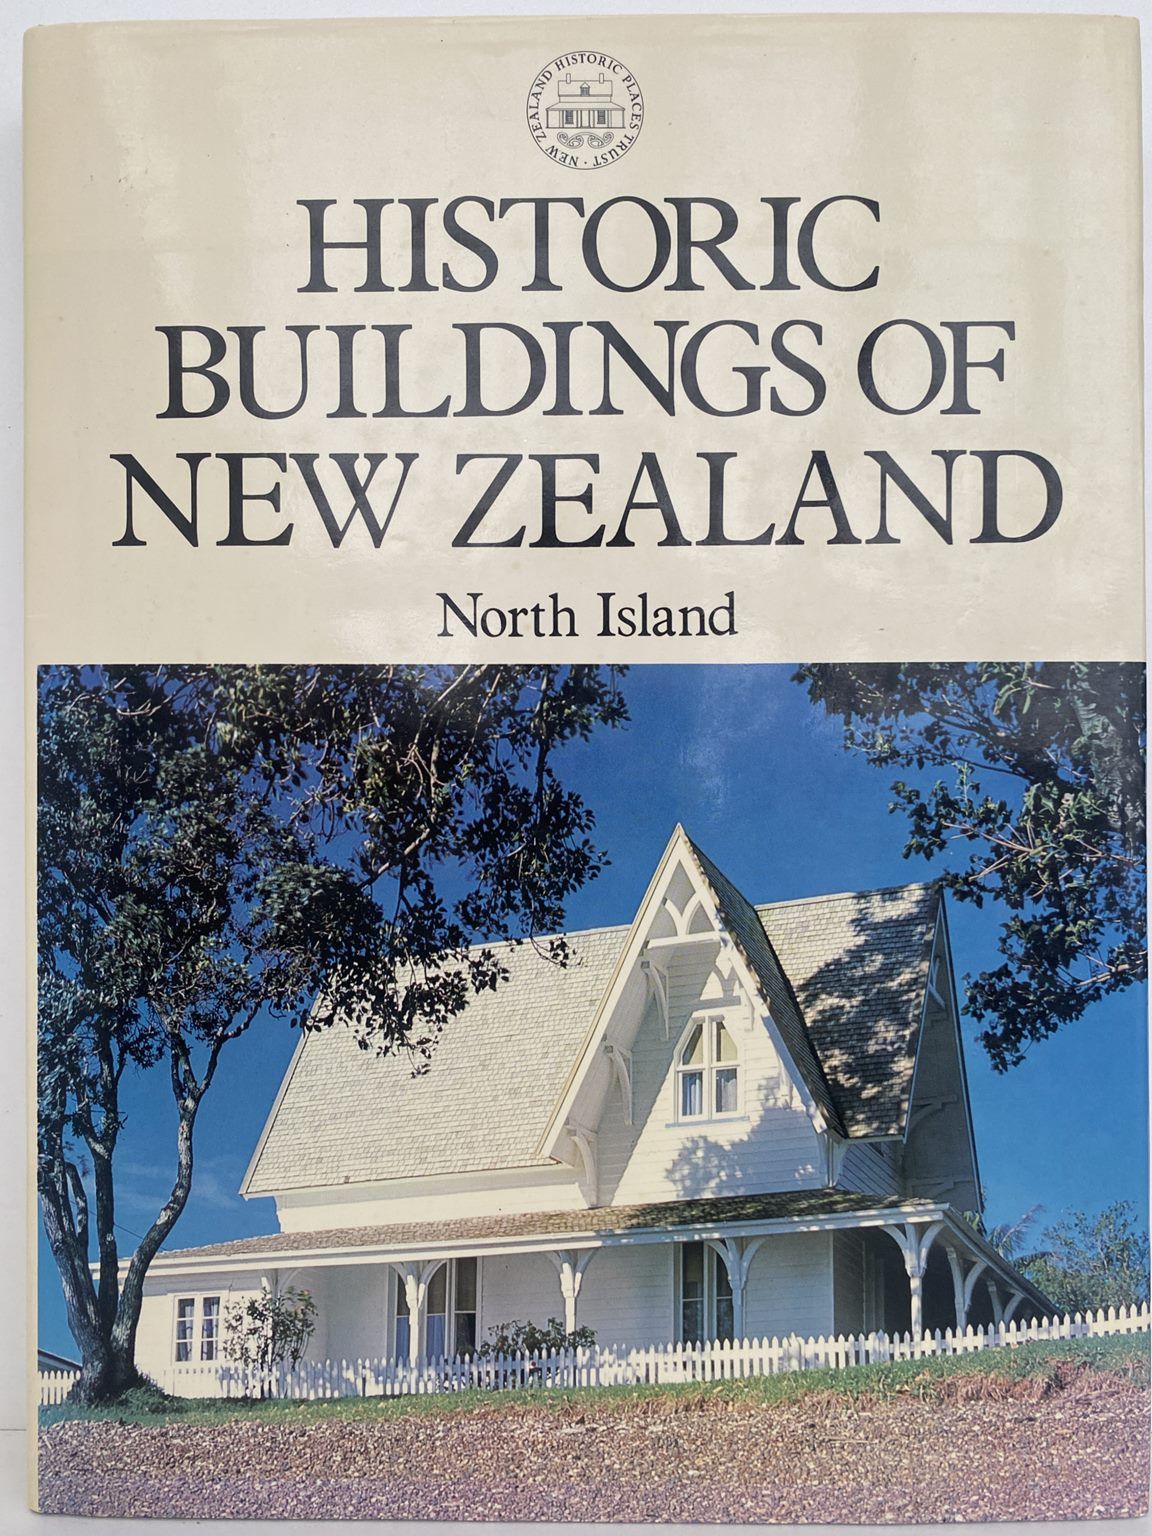 HISTORIC BUILDINGS OF NEW ZEALAND: North Island